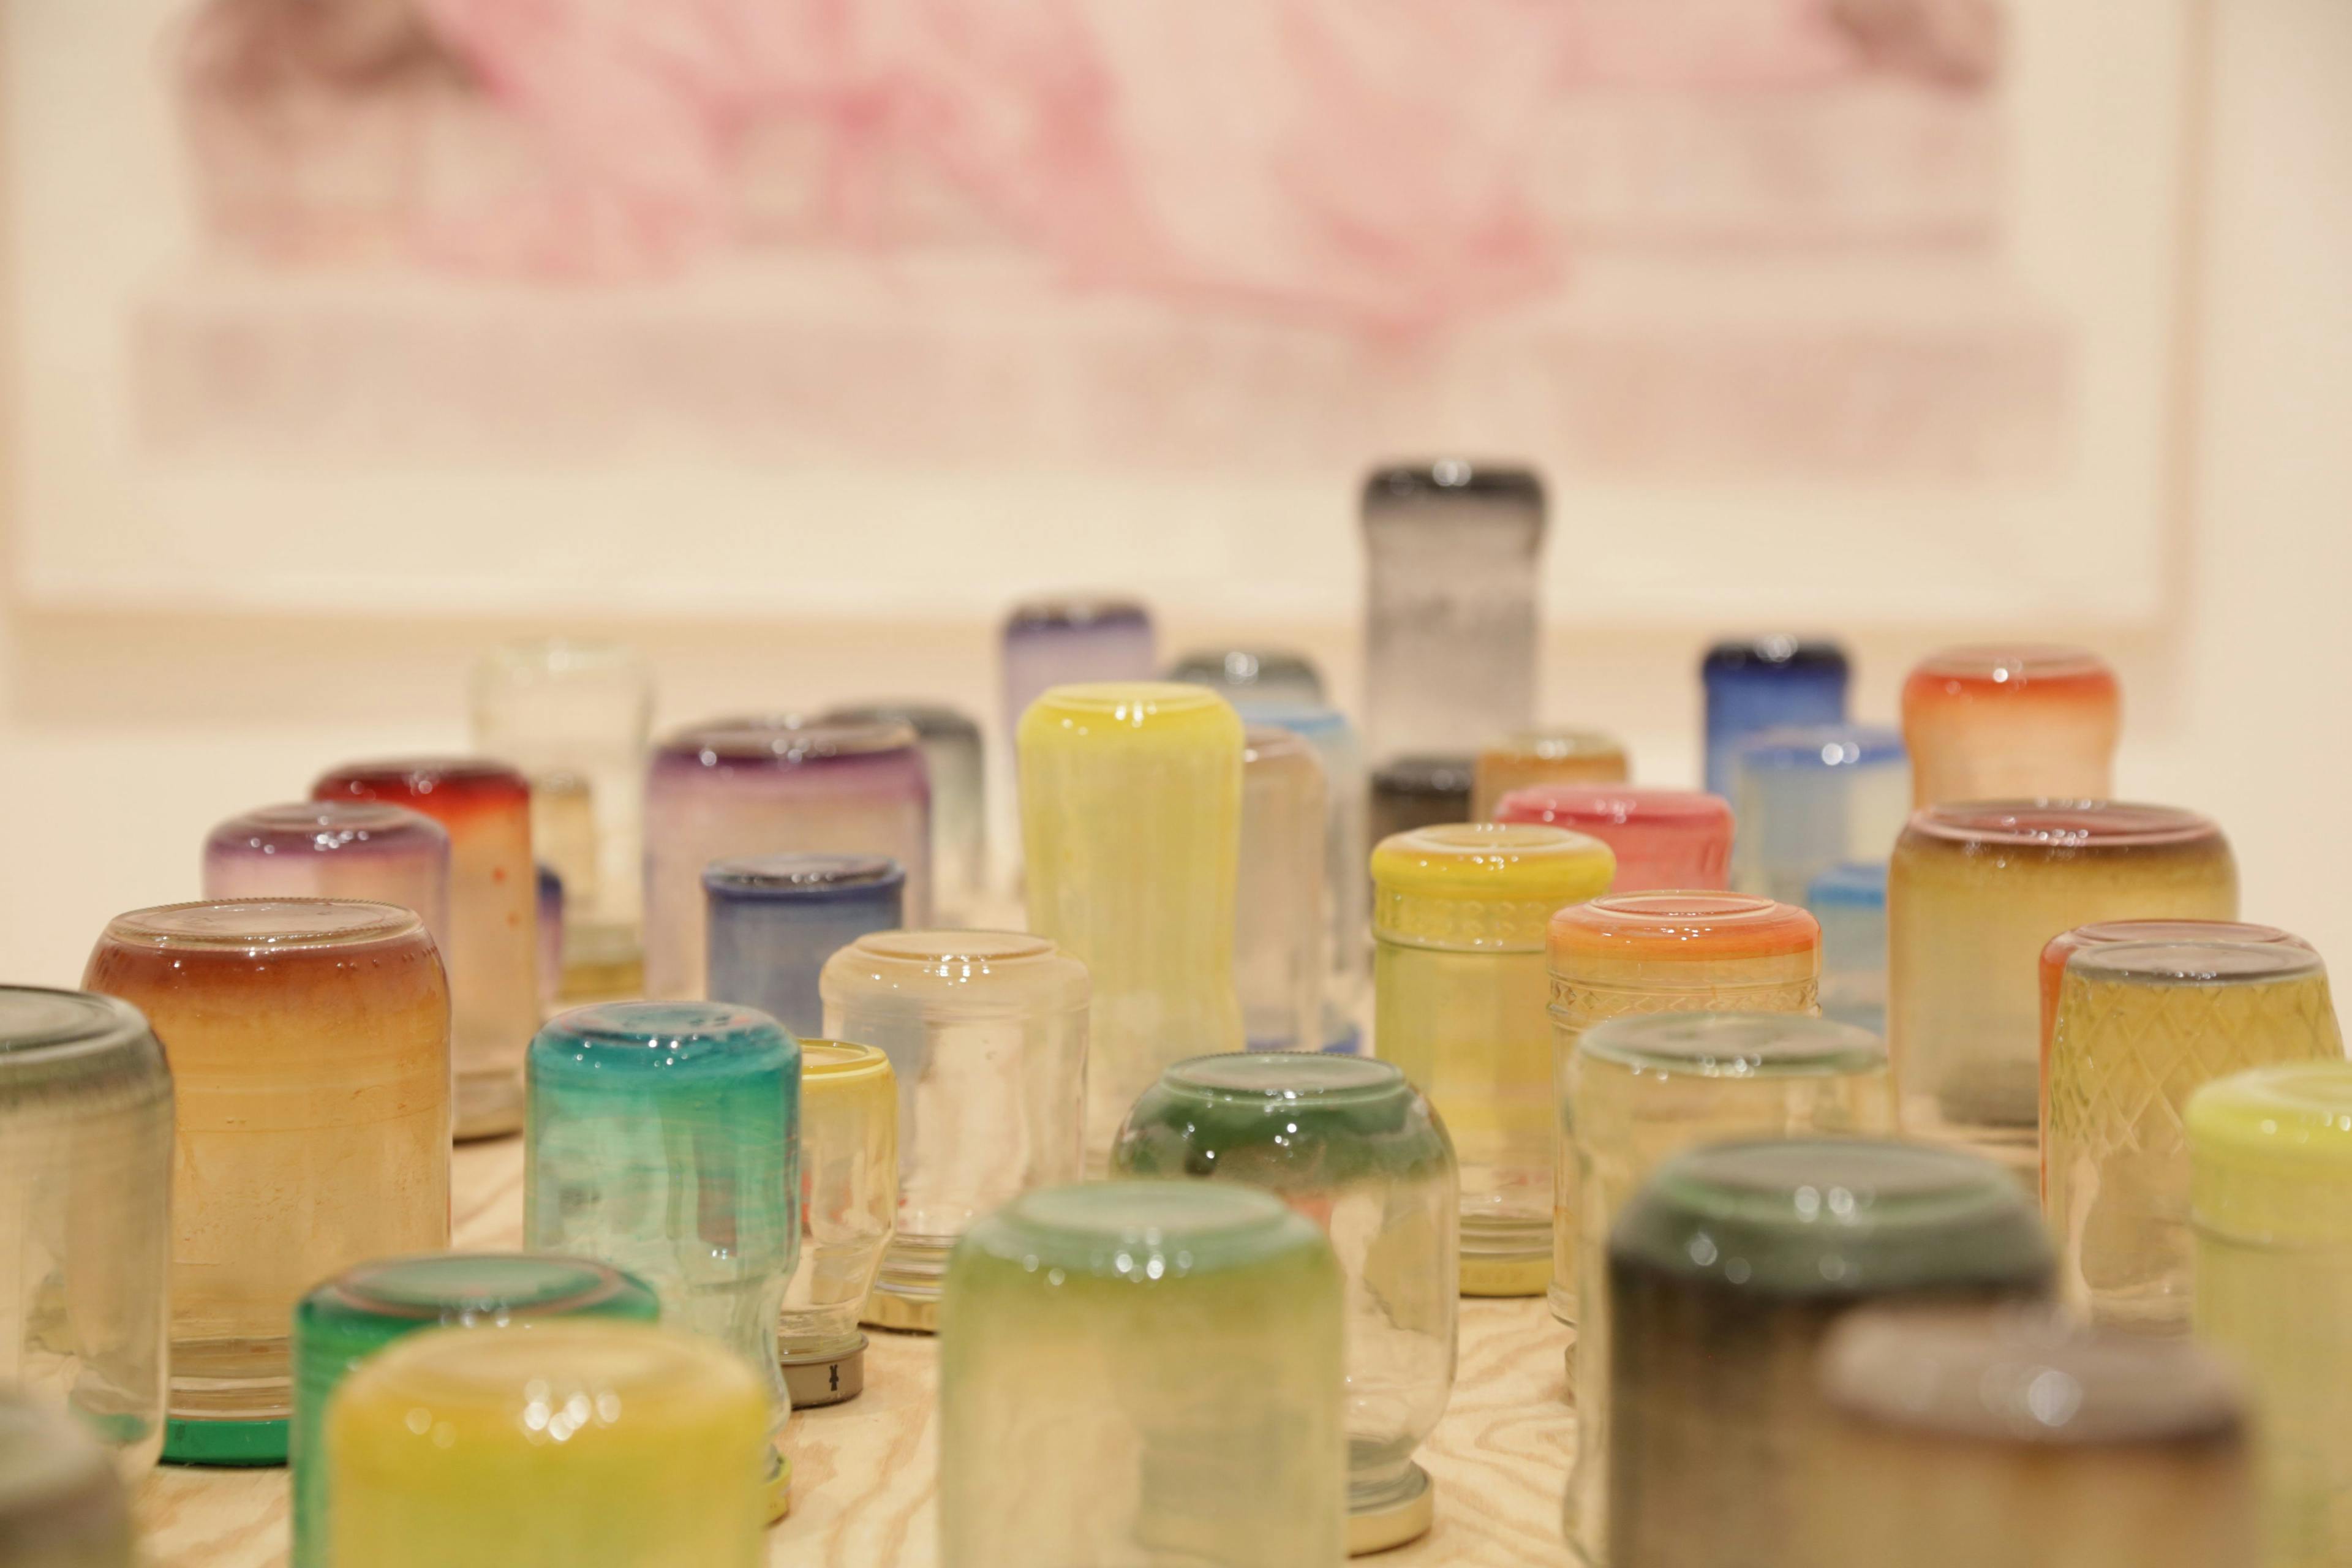 Artwork in image: Solveig Adalsteinsdotter, Evaporated Watercolors in Glass, 2000